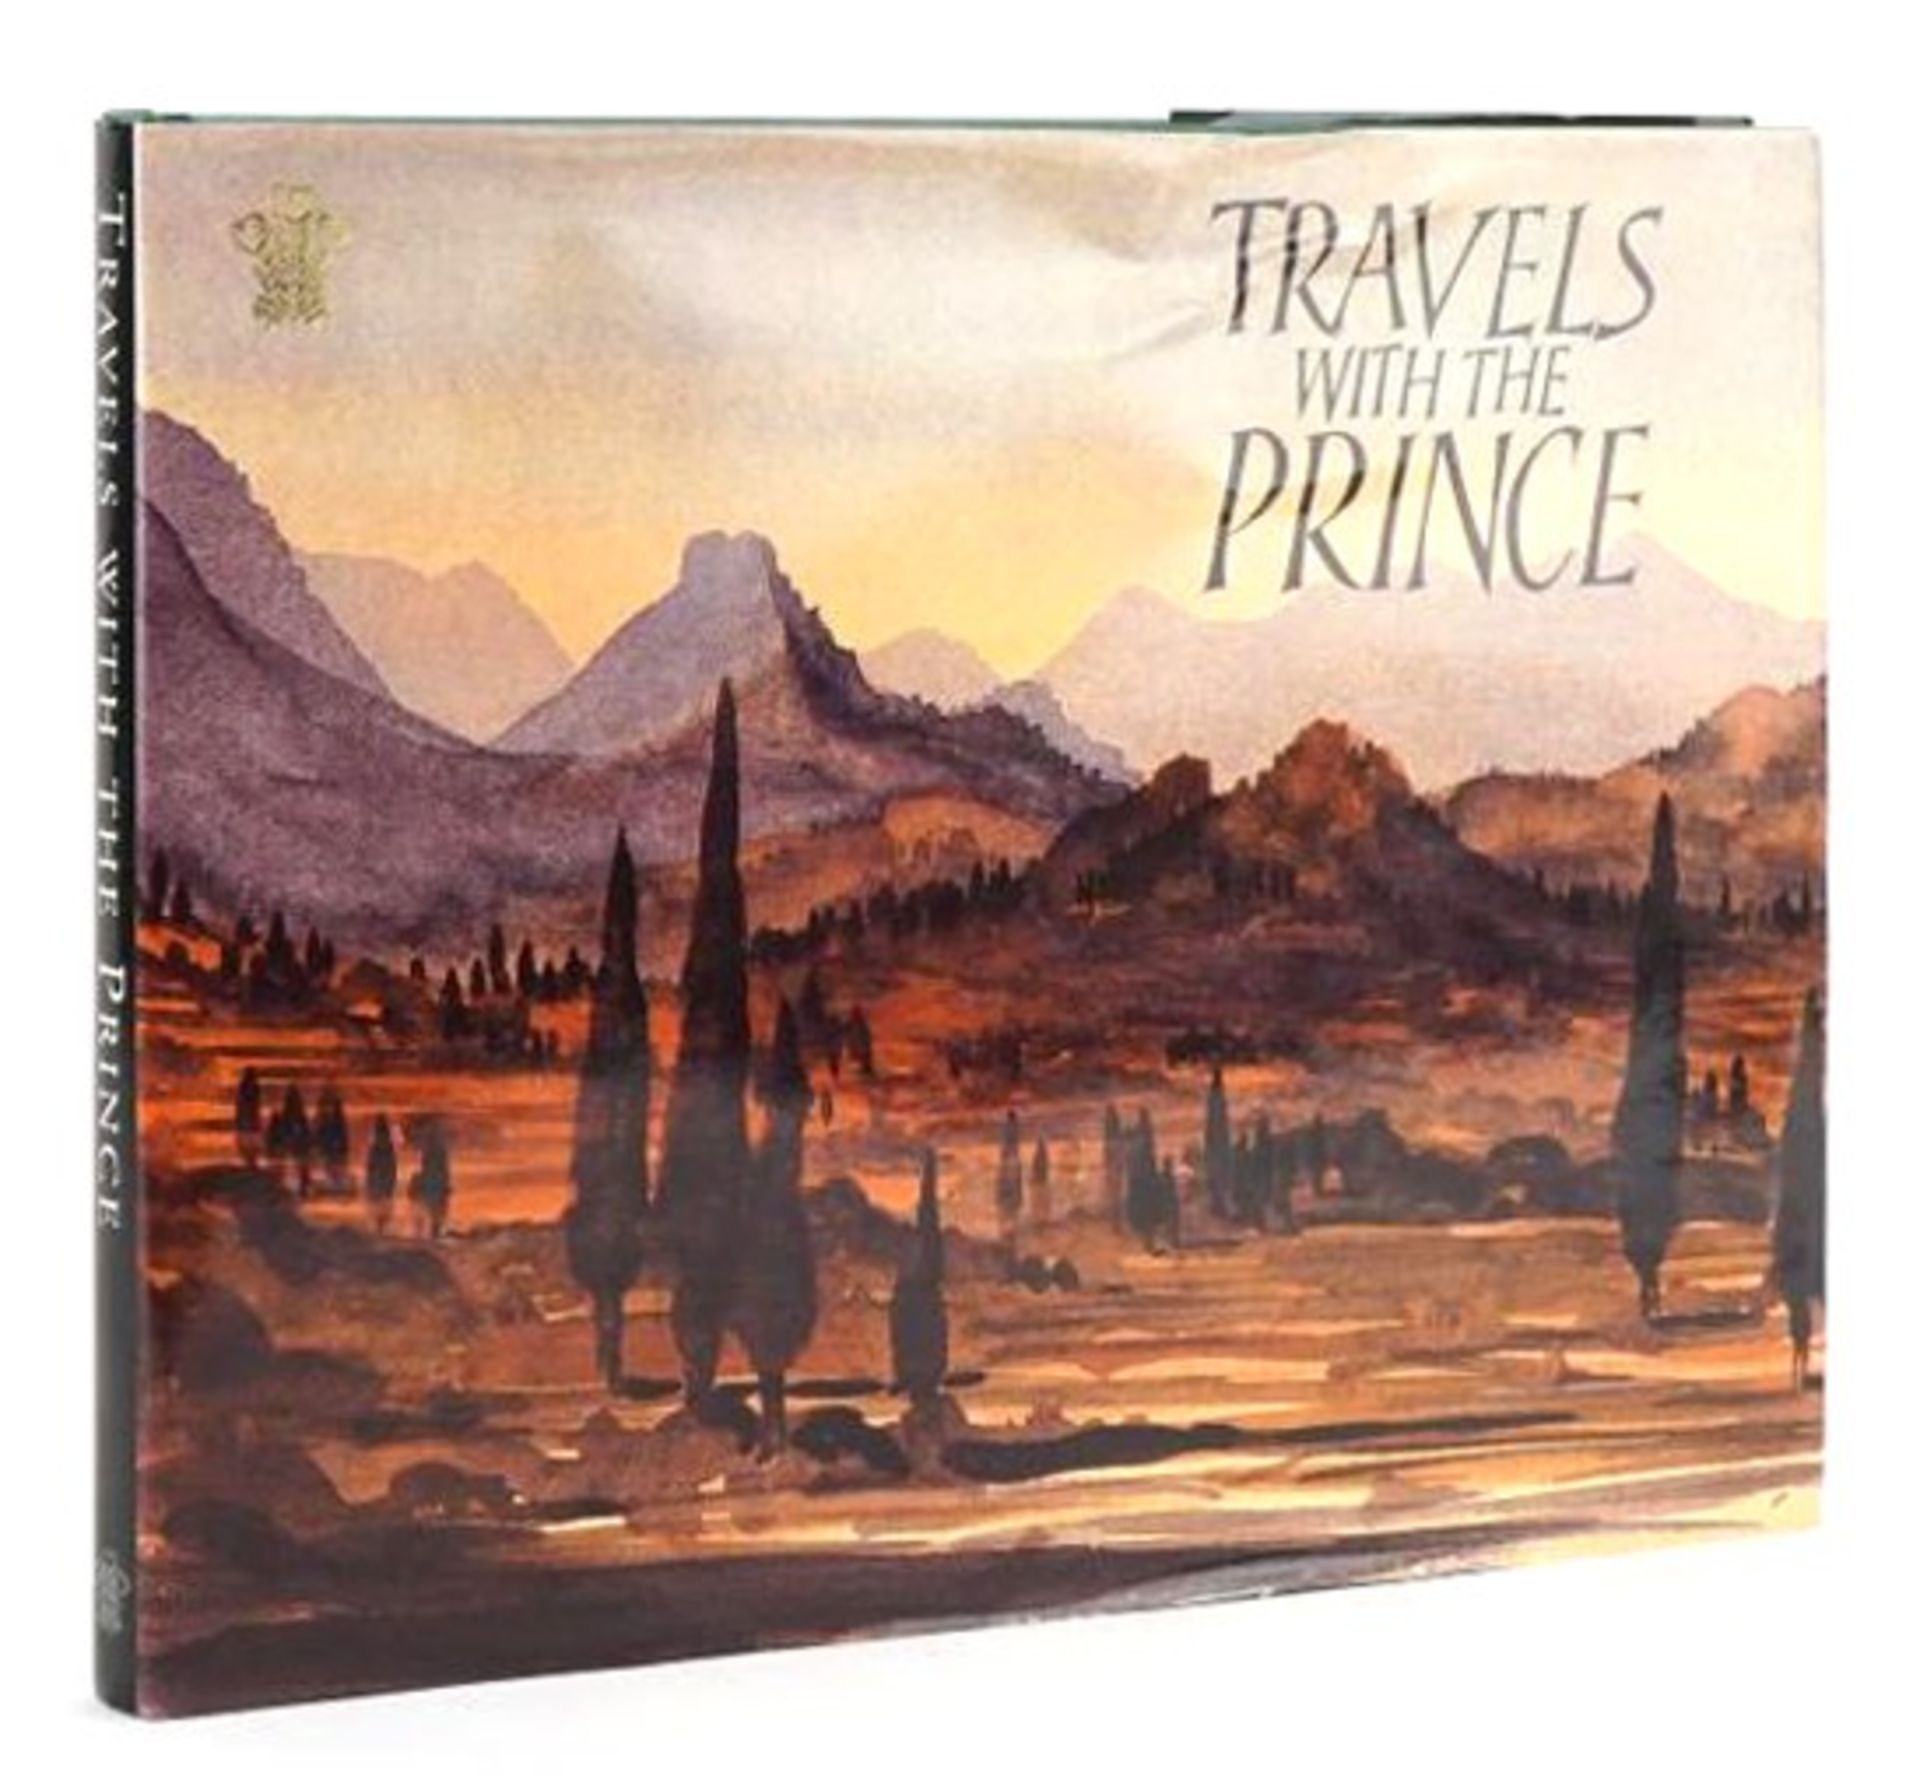 Travels with the Prince hardback book with dust cover selected by His Royal Highness The Prince of - Image 2 of 6